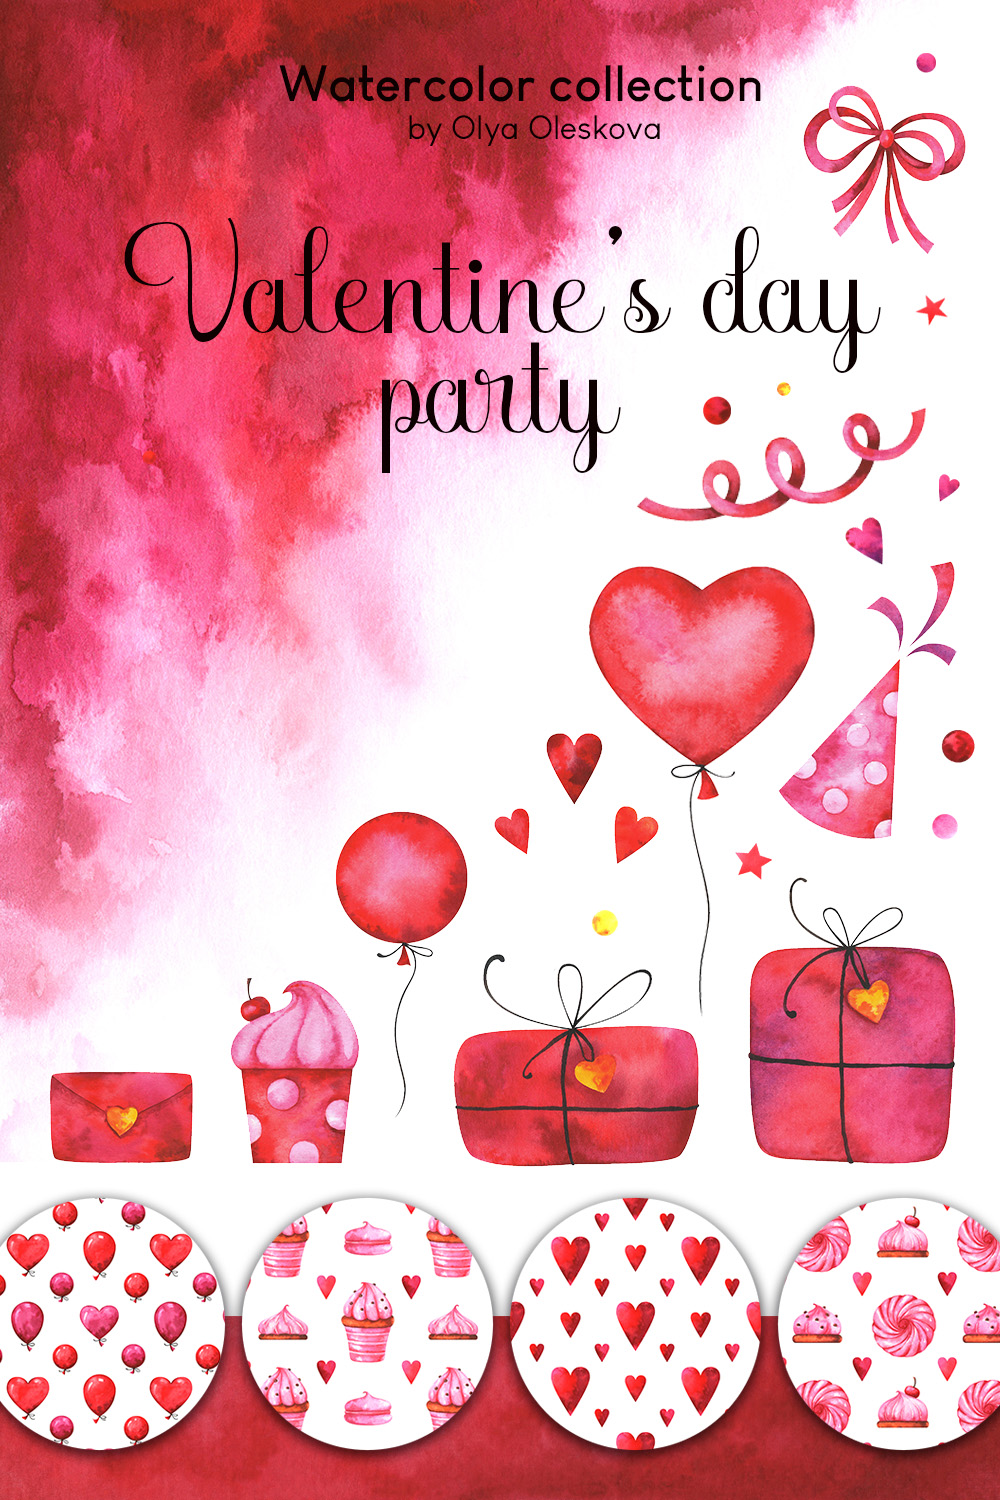 24+ Valentines Day Illustrations. Watercolor Collection pinterest image.